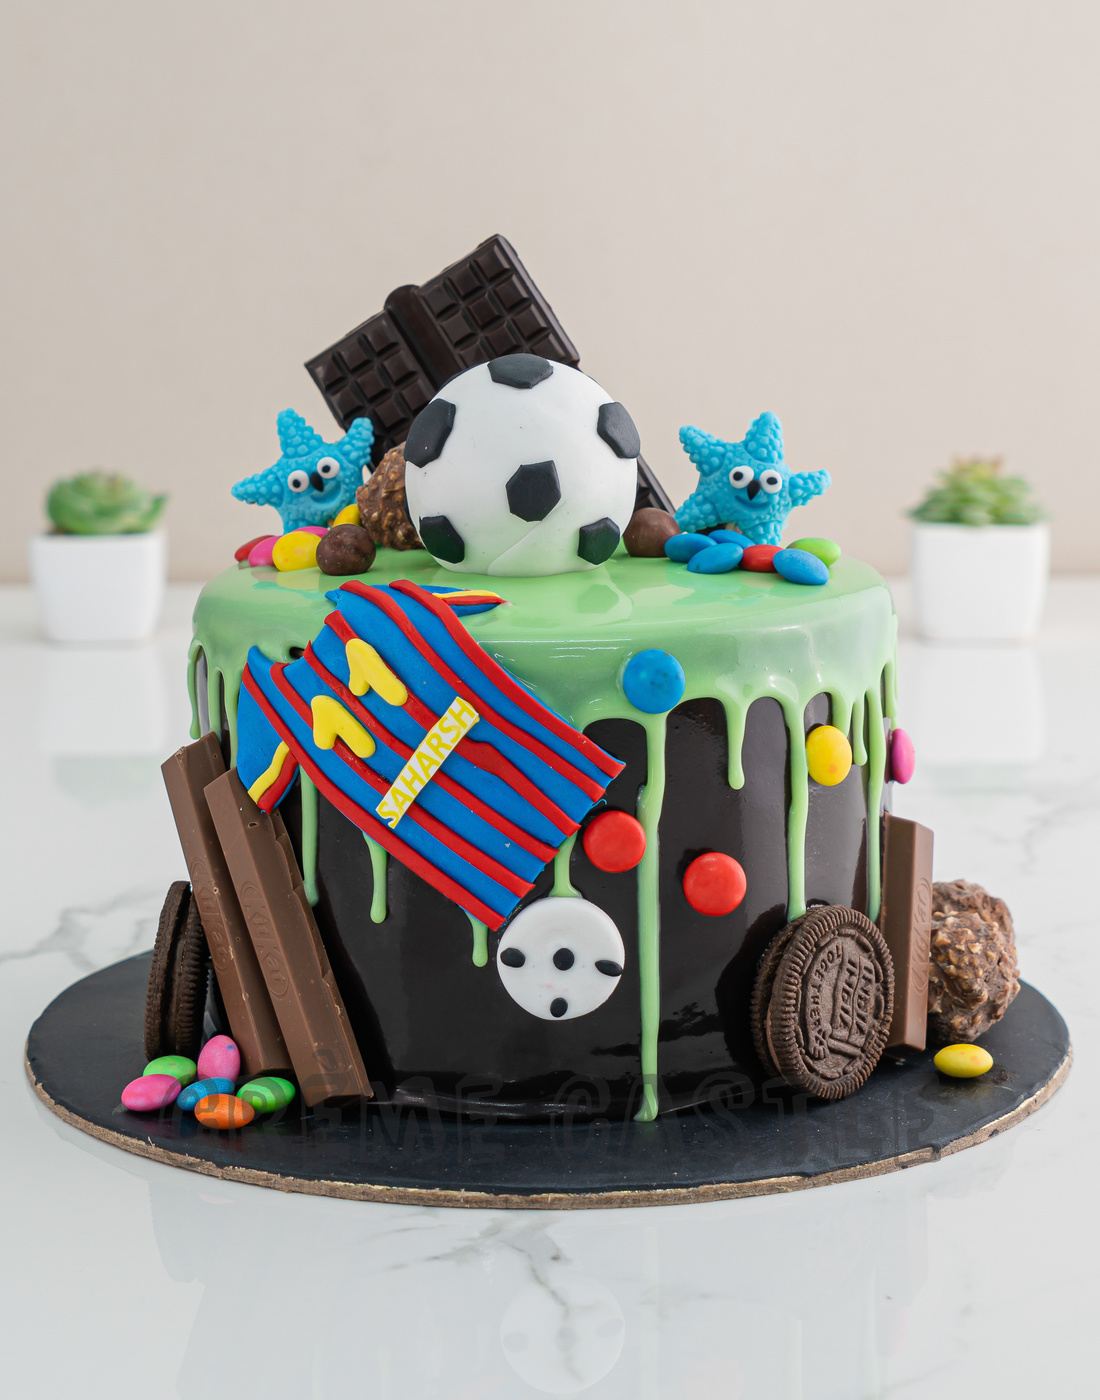 How to make FC Barcelona Messi Team Cake | Step by steps - YouTube